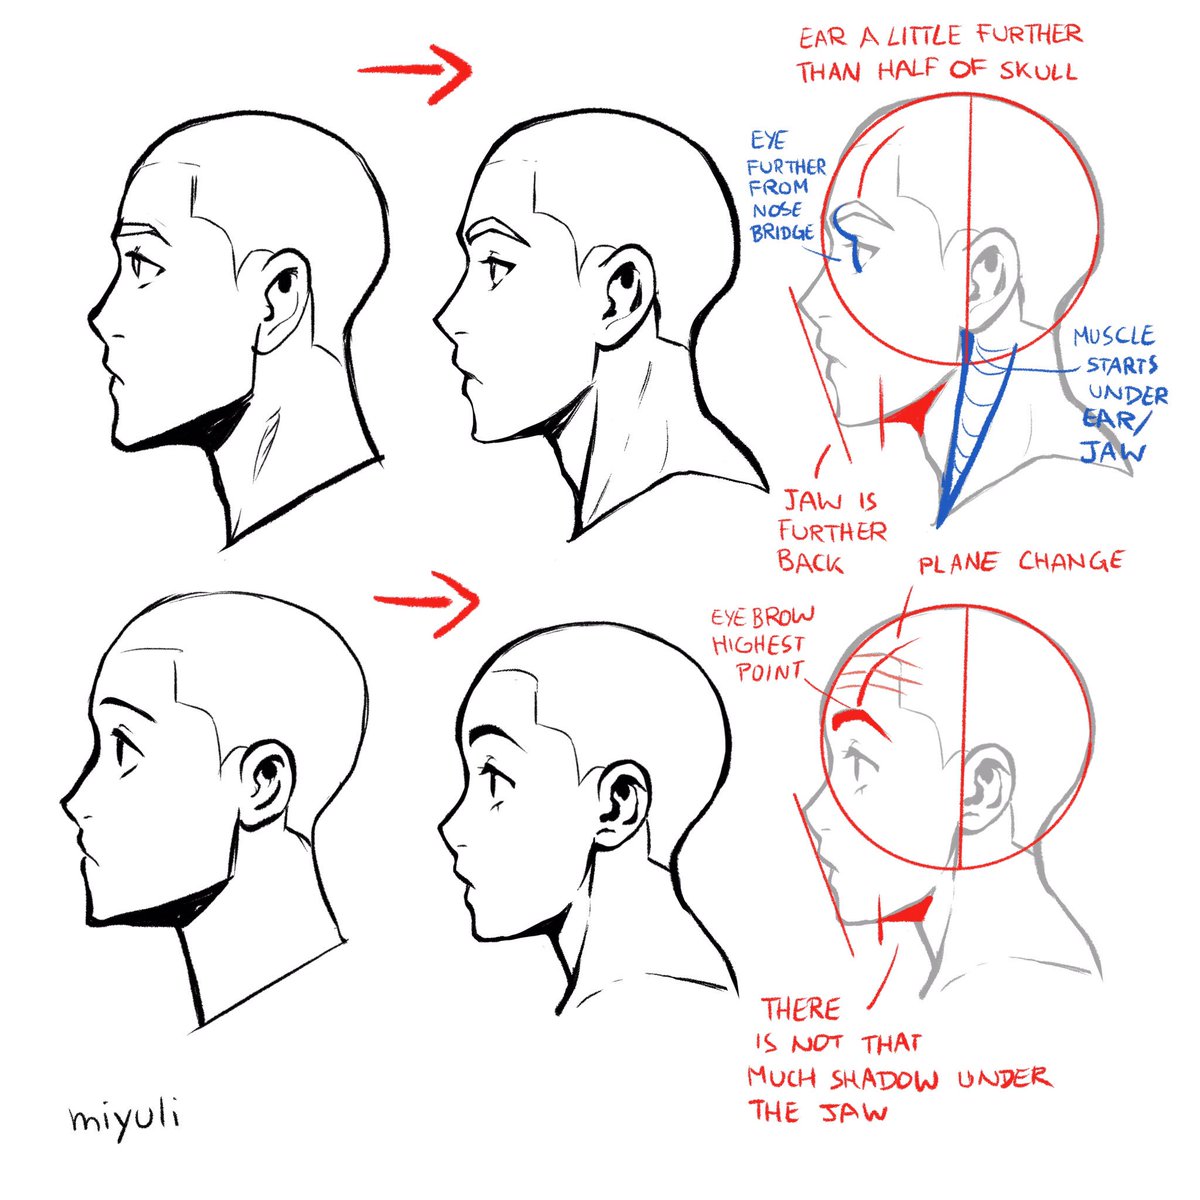 Made small changes to how I draw profiles. 